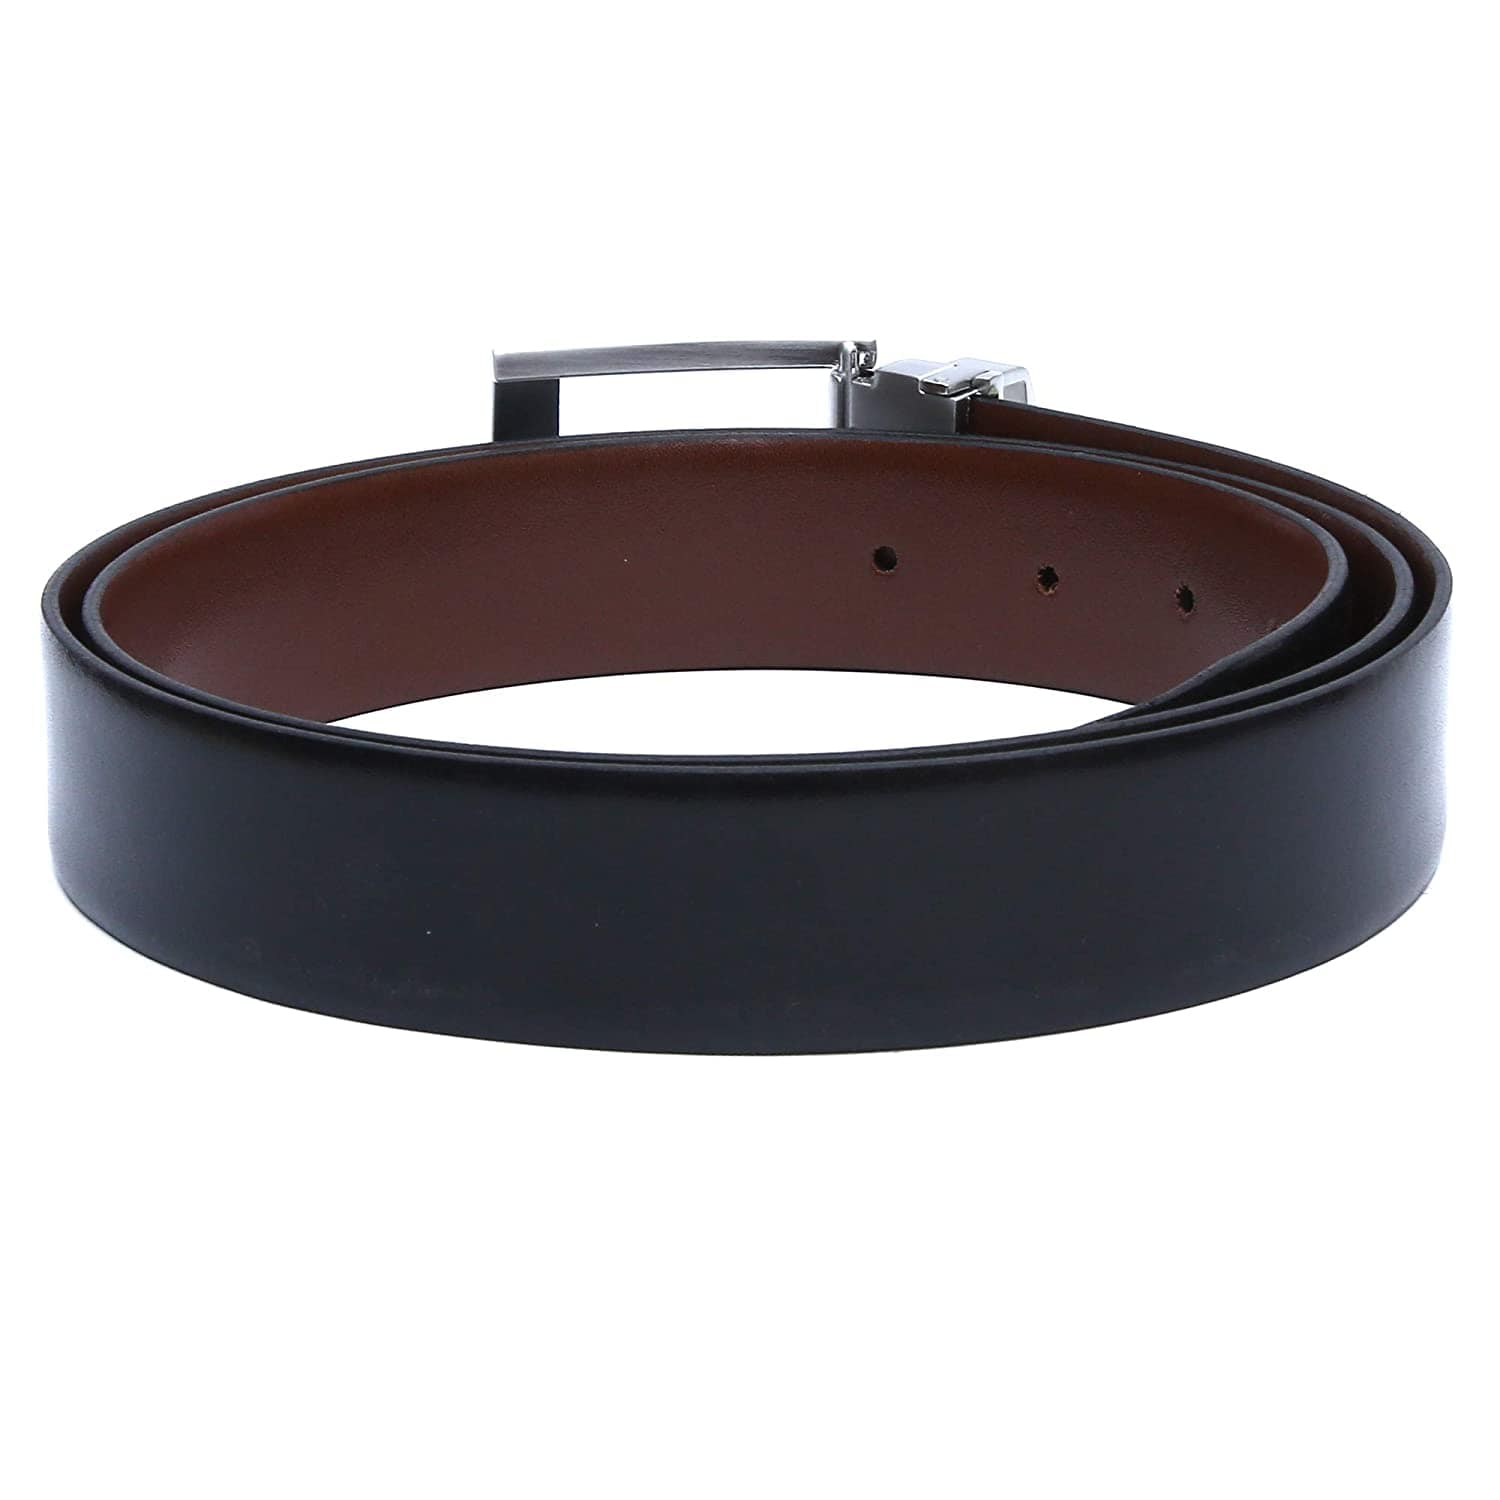 CROSS MEISTER PREMIUM LEATHER BELT WITH 30 MM PRONGED BUCKLE FOR MEN XL (112CM) - BLACK AND BROWN - AC1298194-2-XXL2